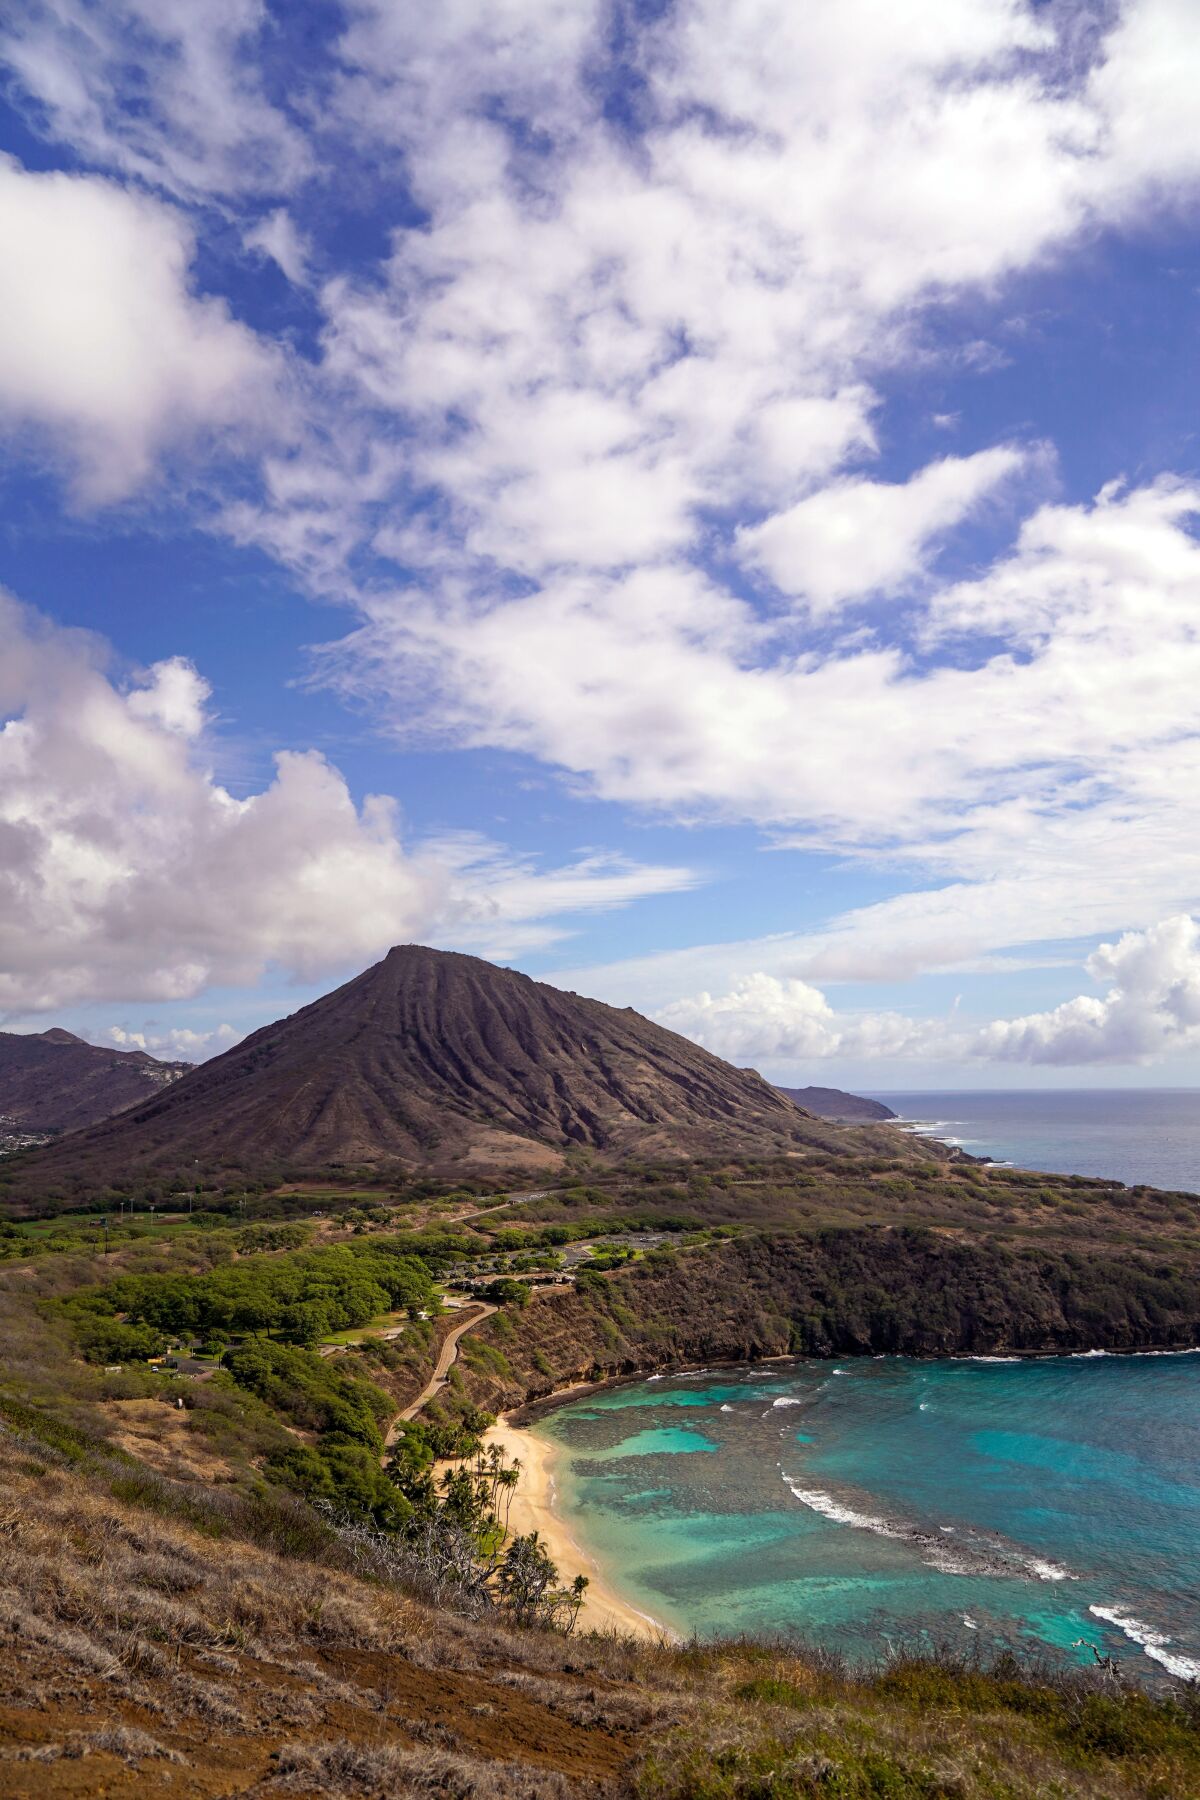 Hanauma Bay with Koko Head in the background from a hiking trail overlooking the popular nature preserve.